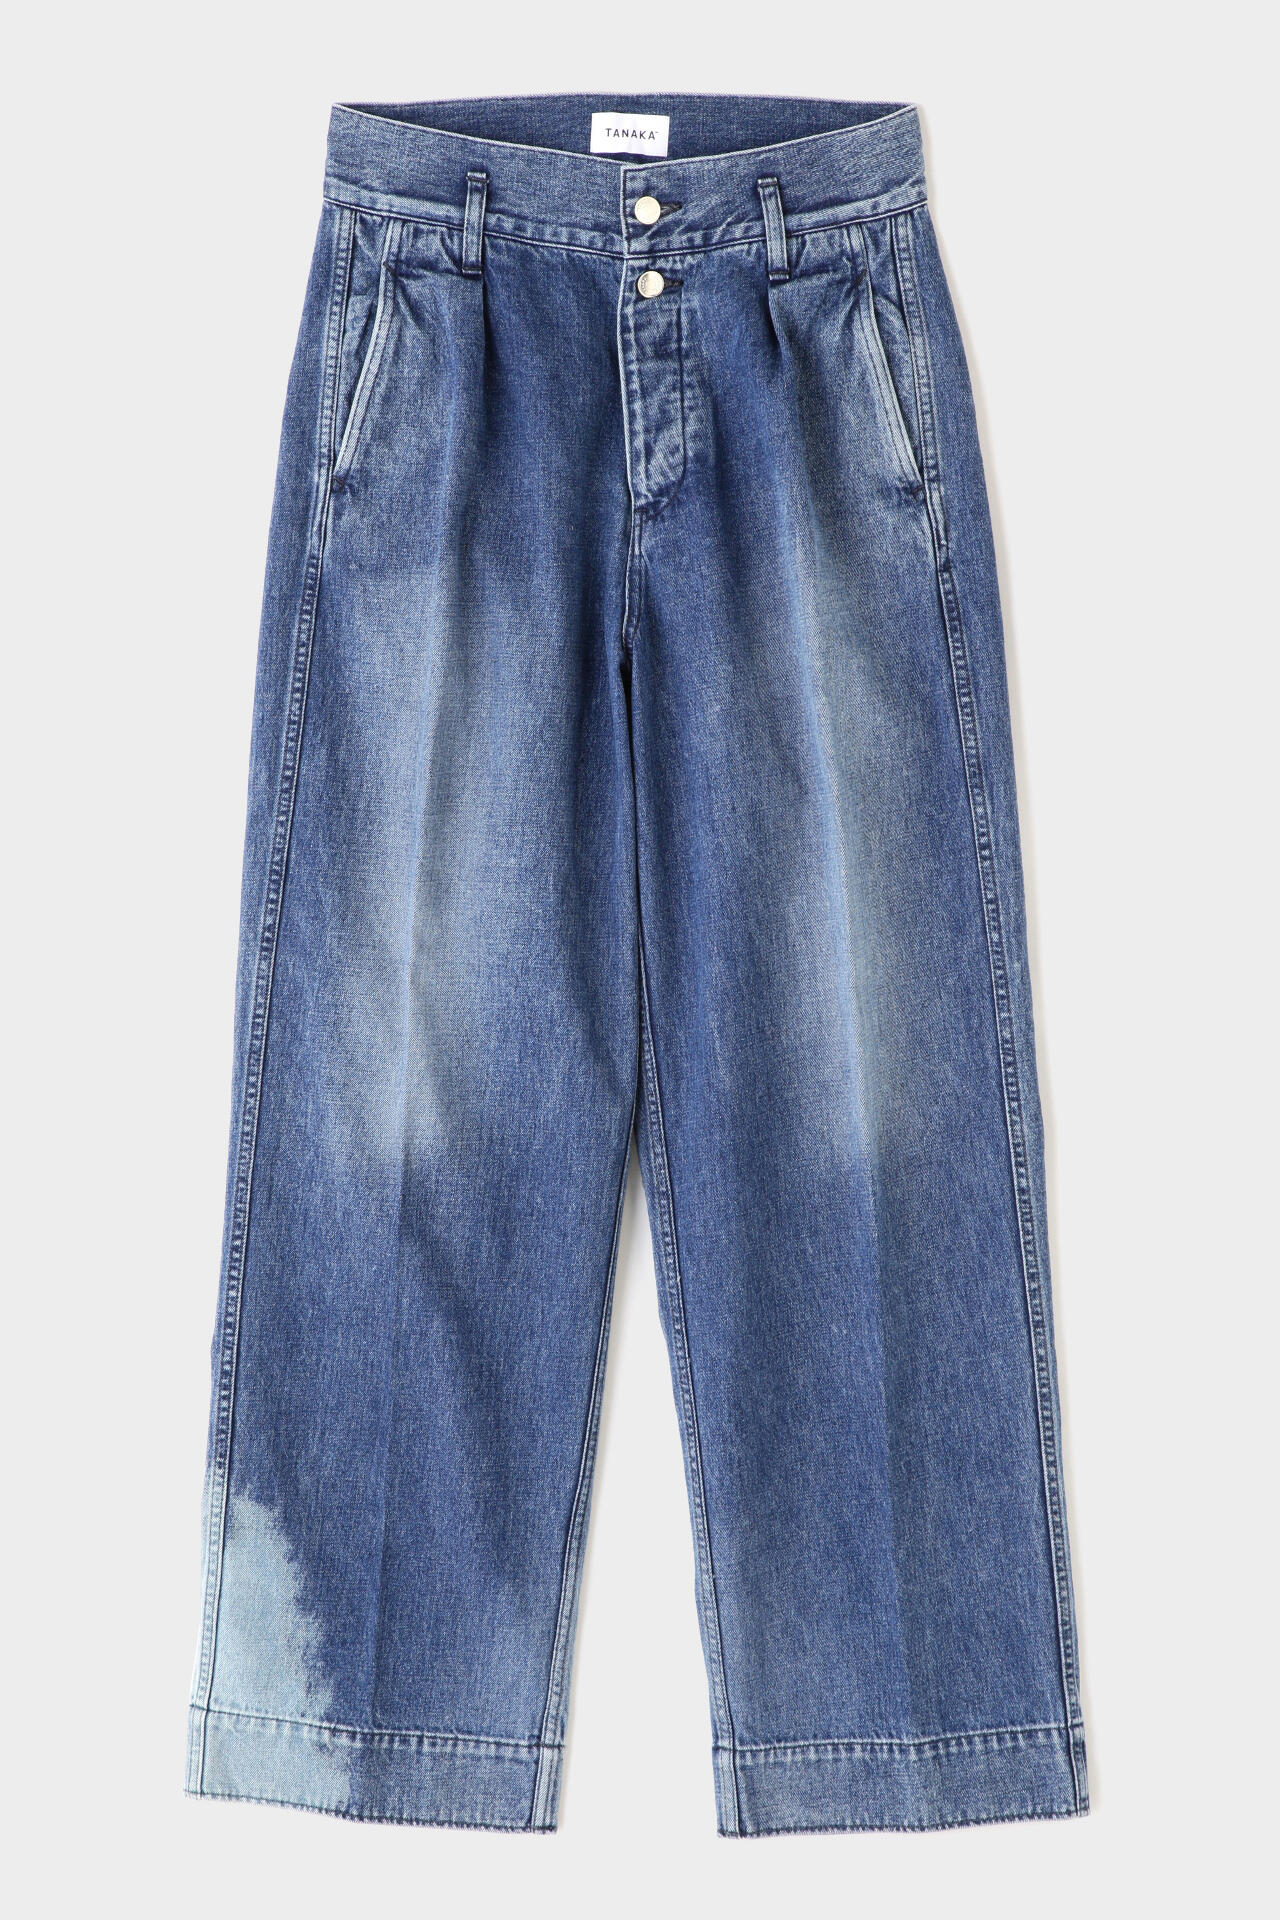 LE PHIL》【TANAKA / タナカ】THE WIDE JEAN TROUSERS || LE PHIL[ル ...